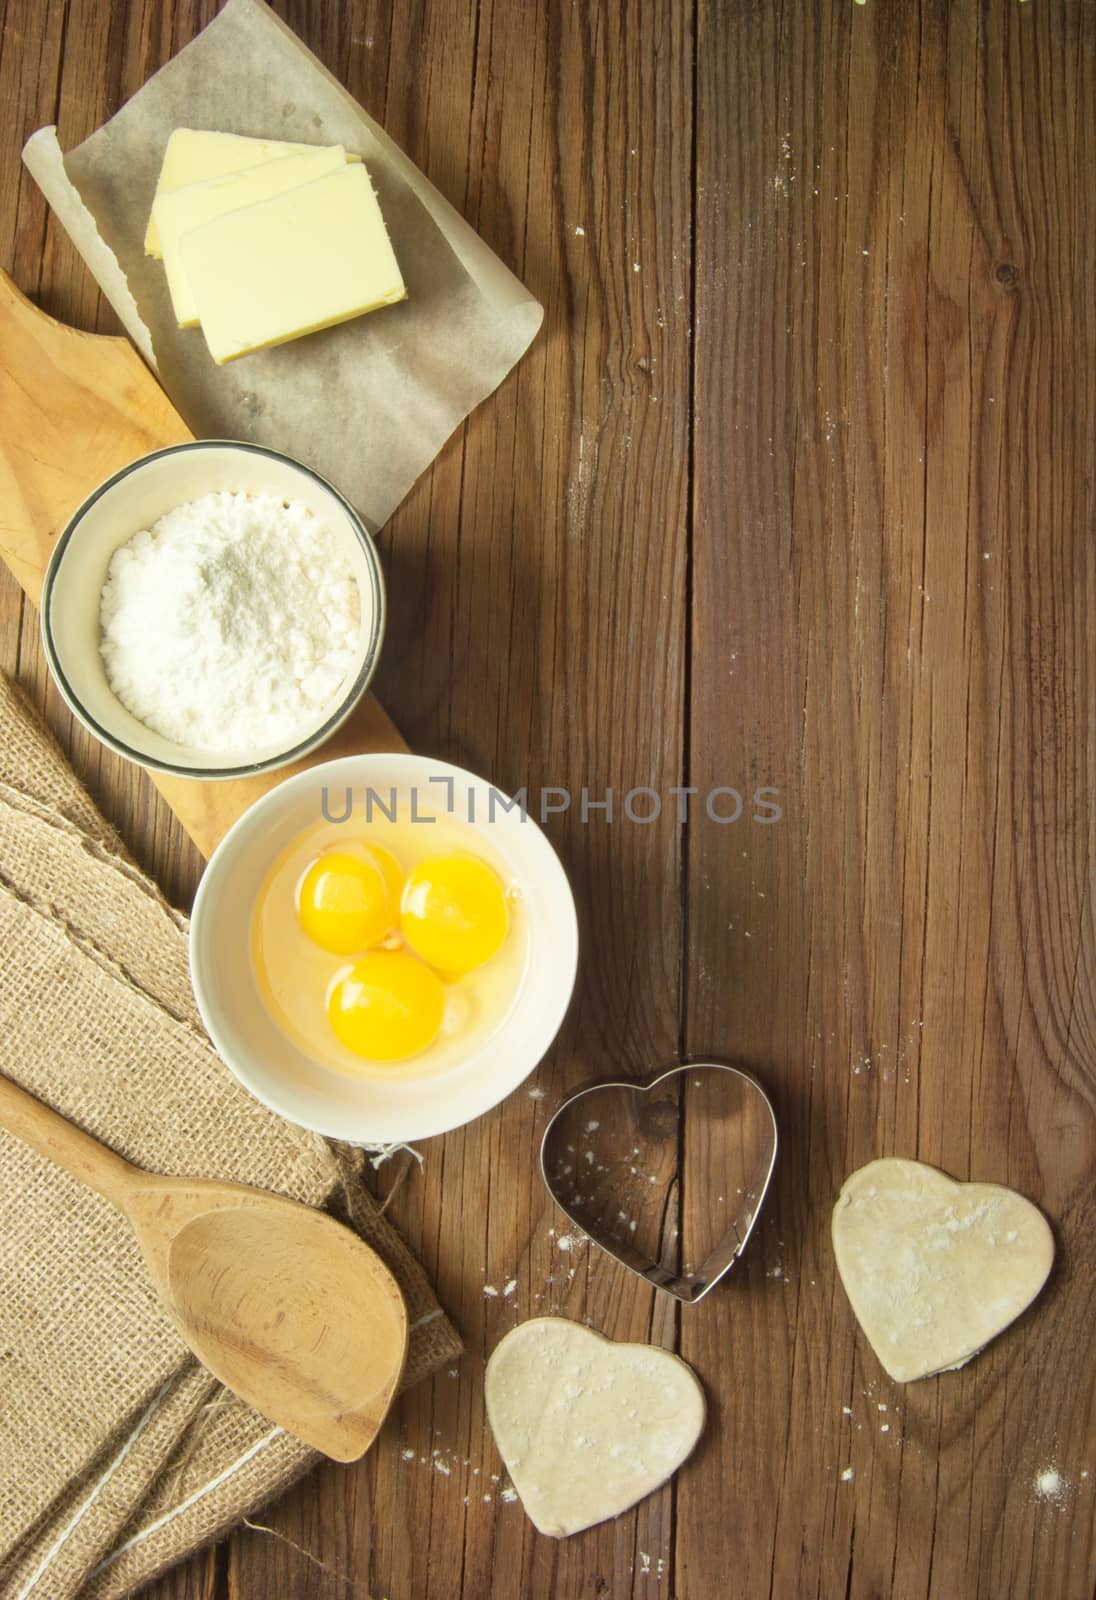 Baking preparation ingredients including eggs, flour and heart shape cookie shapers